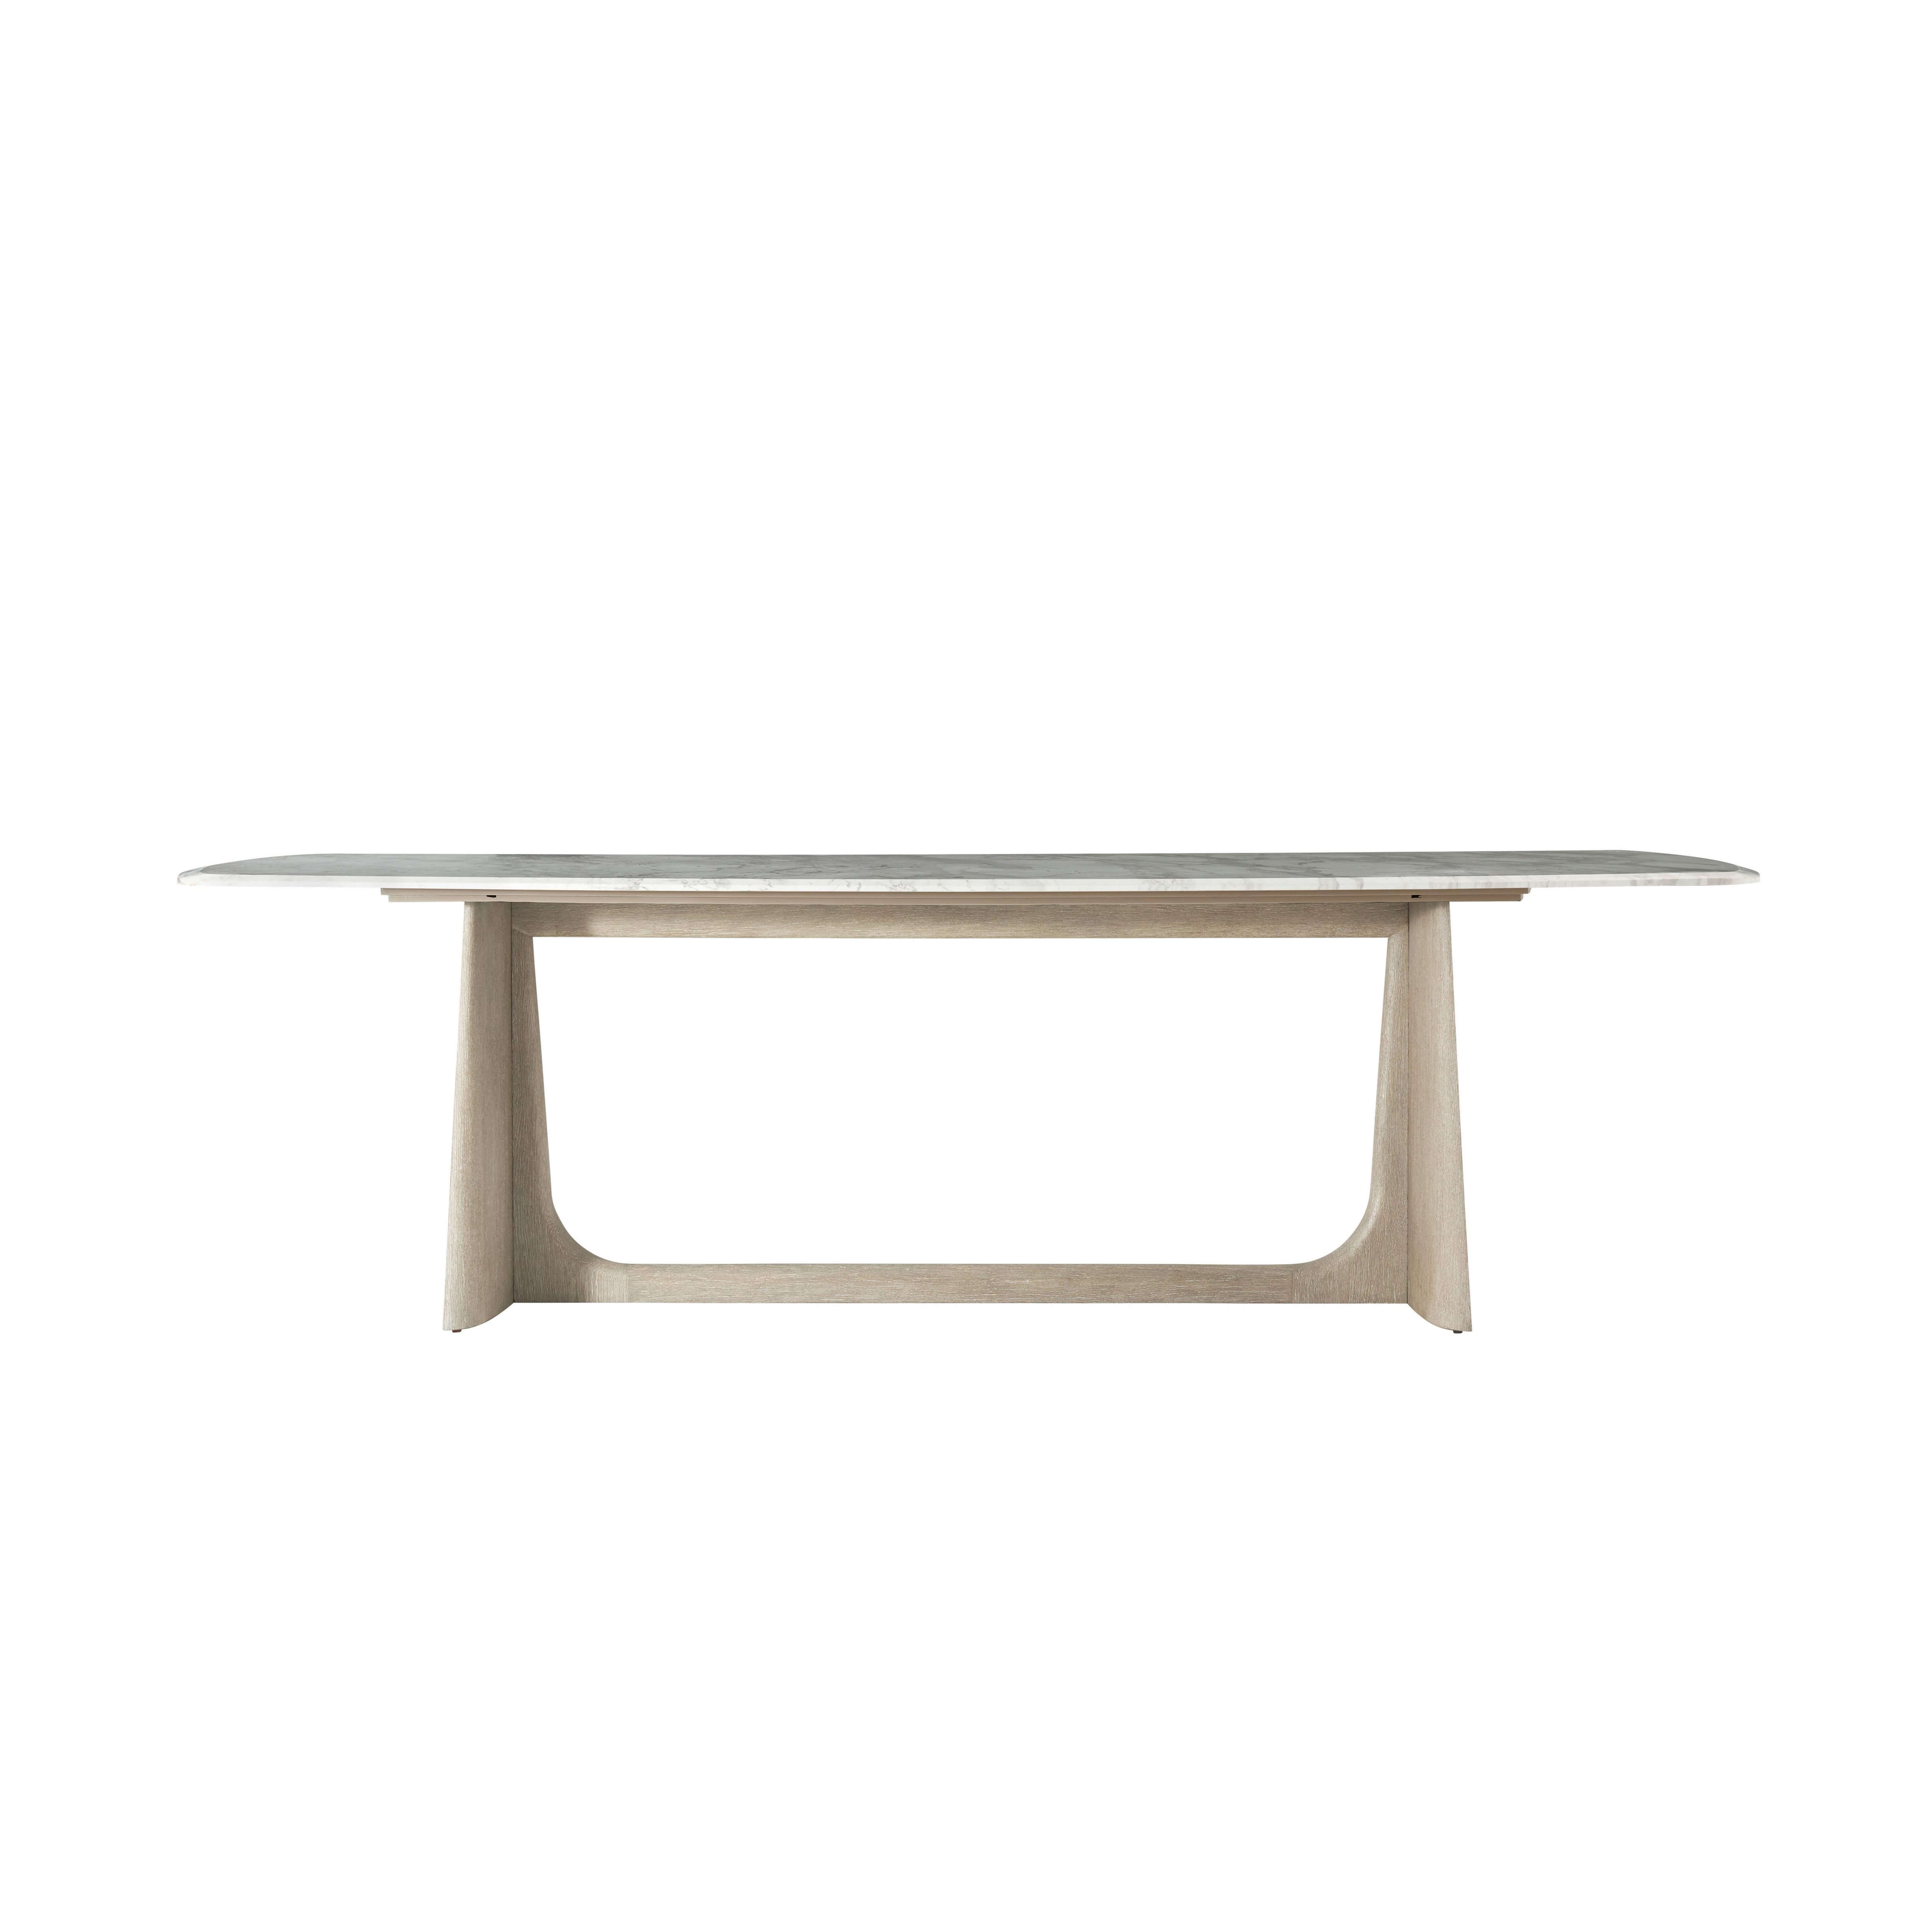 REPOSE DINING TABLE MARBLE TOP